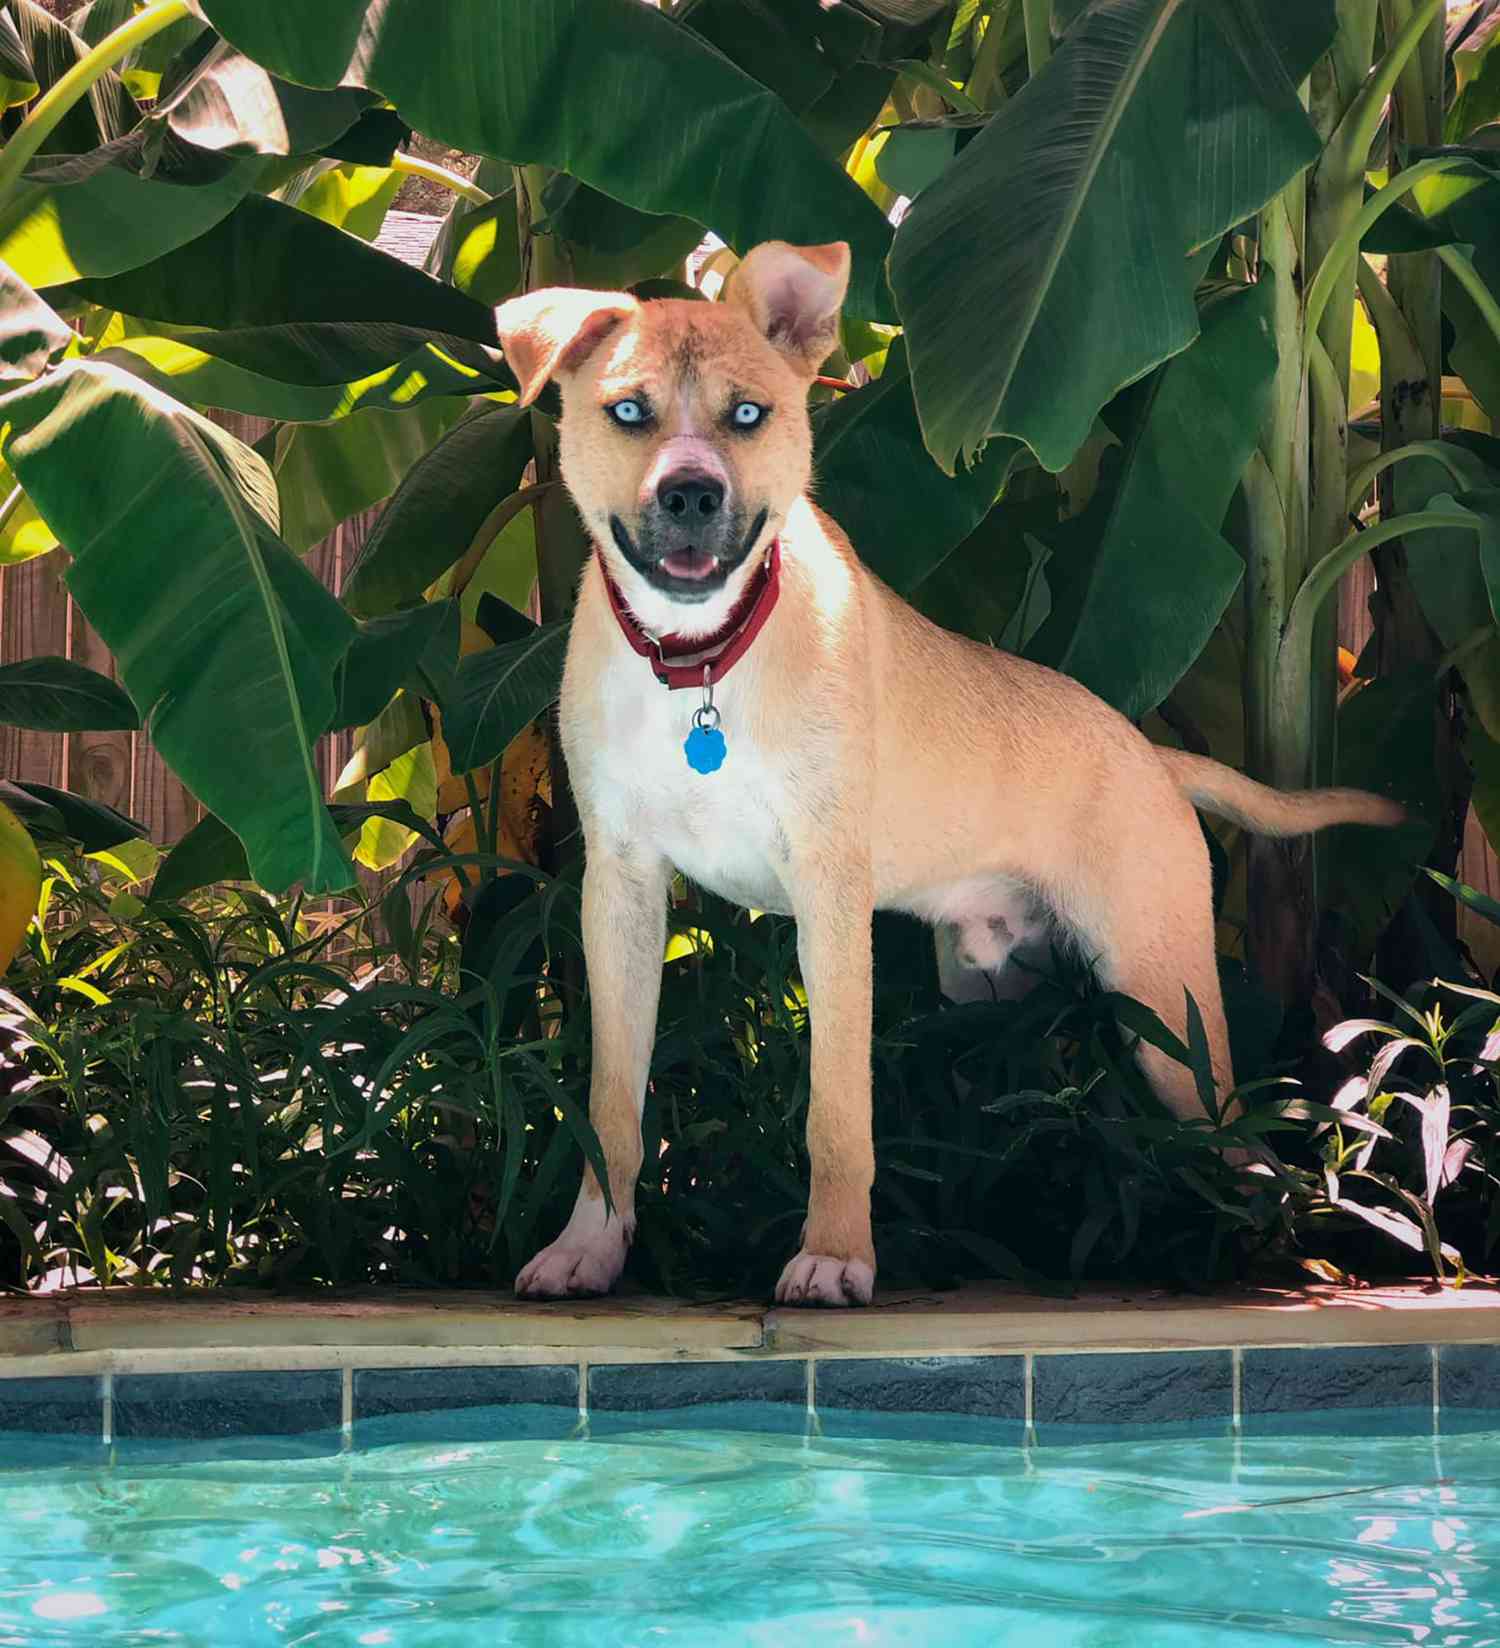 hank, the dog from the funny adoption website, standing at the edge of a pool